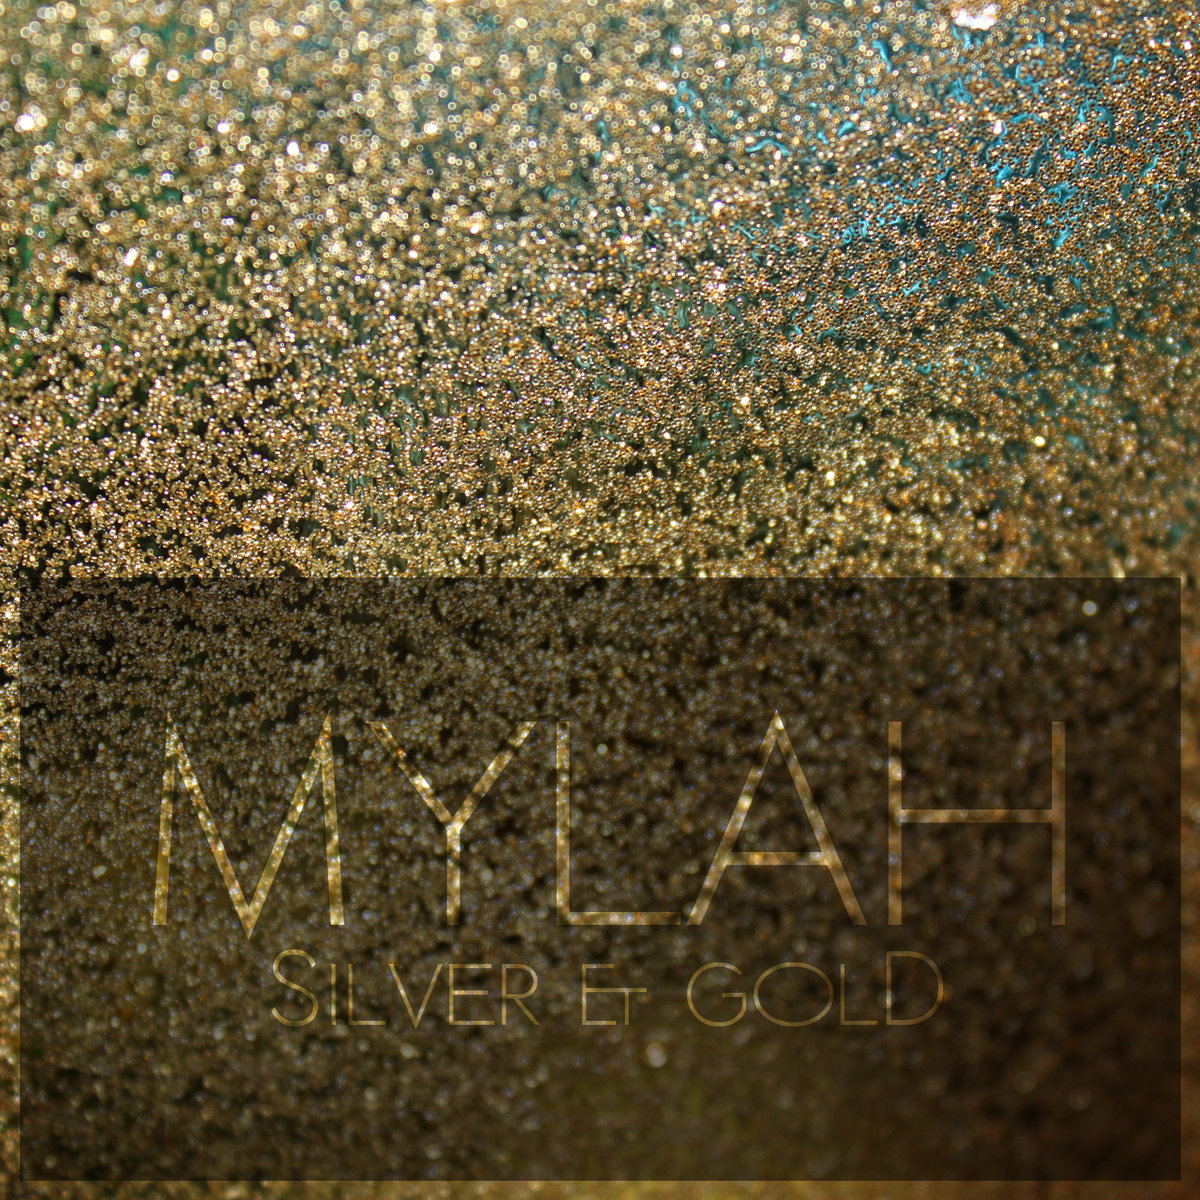 New Music: Mylah "Currency" (Produced by Brandon "B.A.M." Alexander)